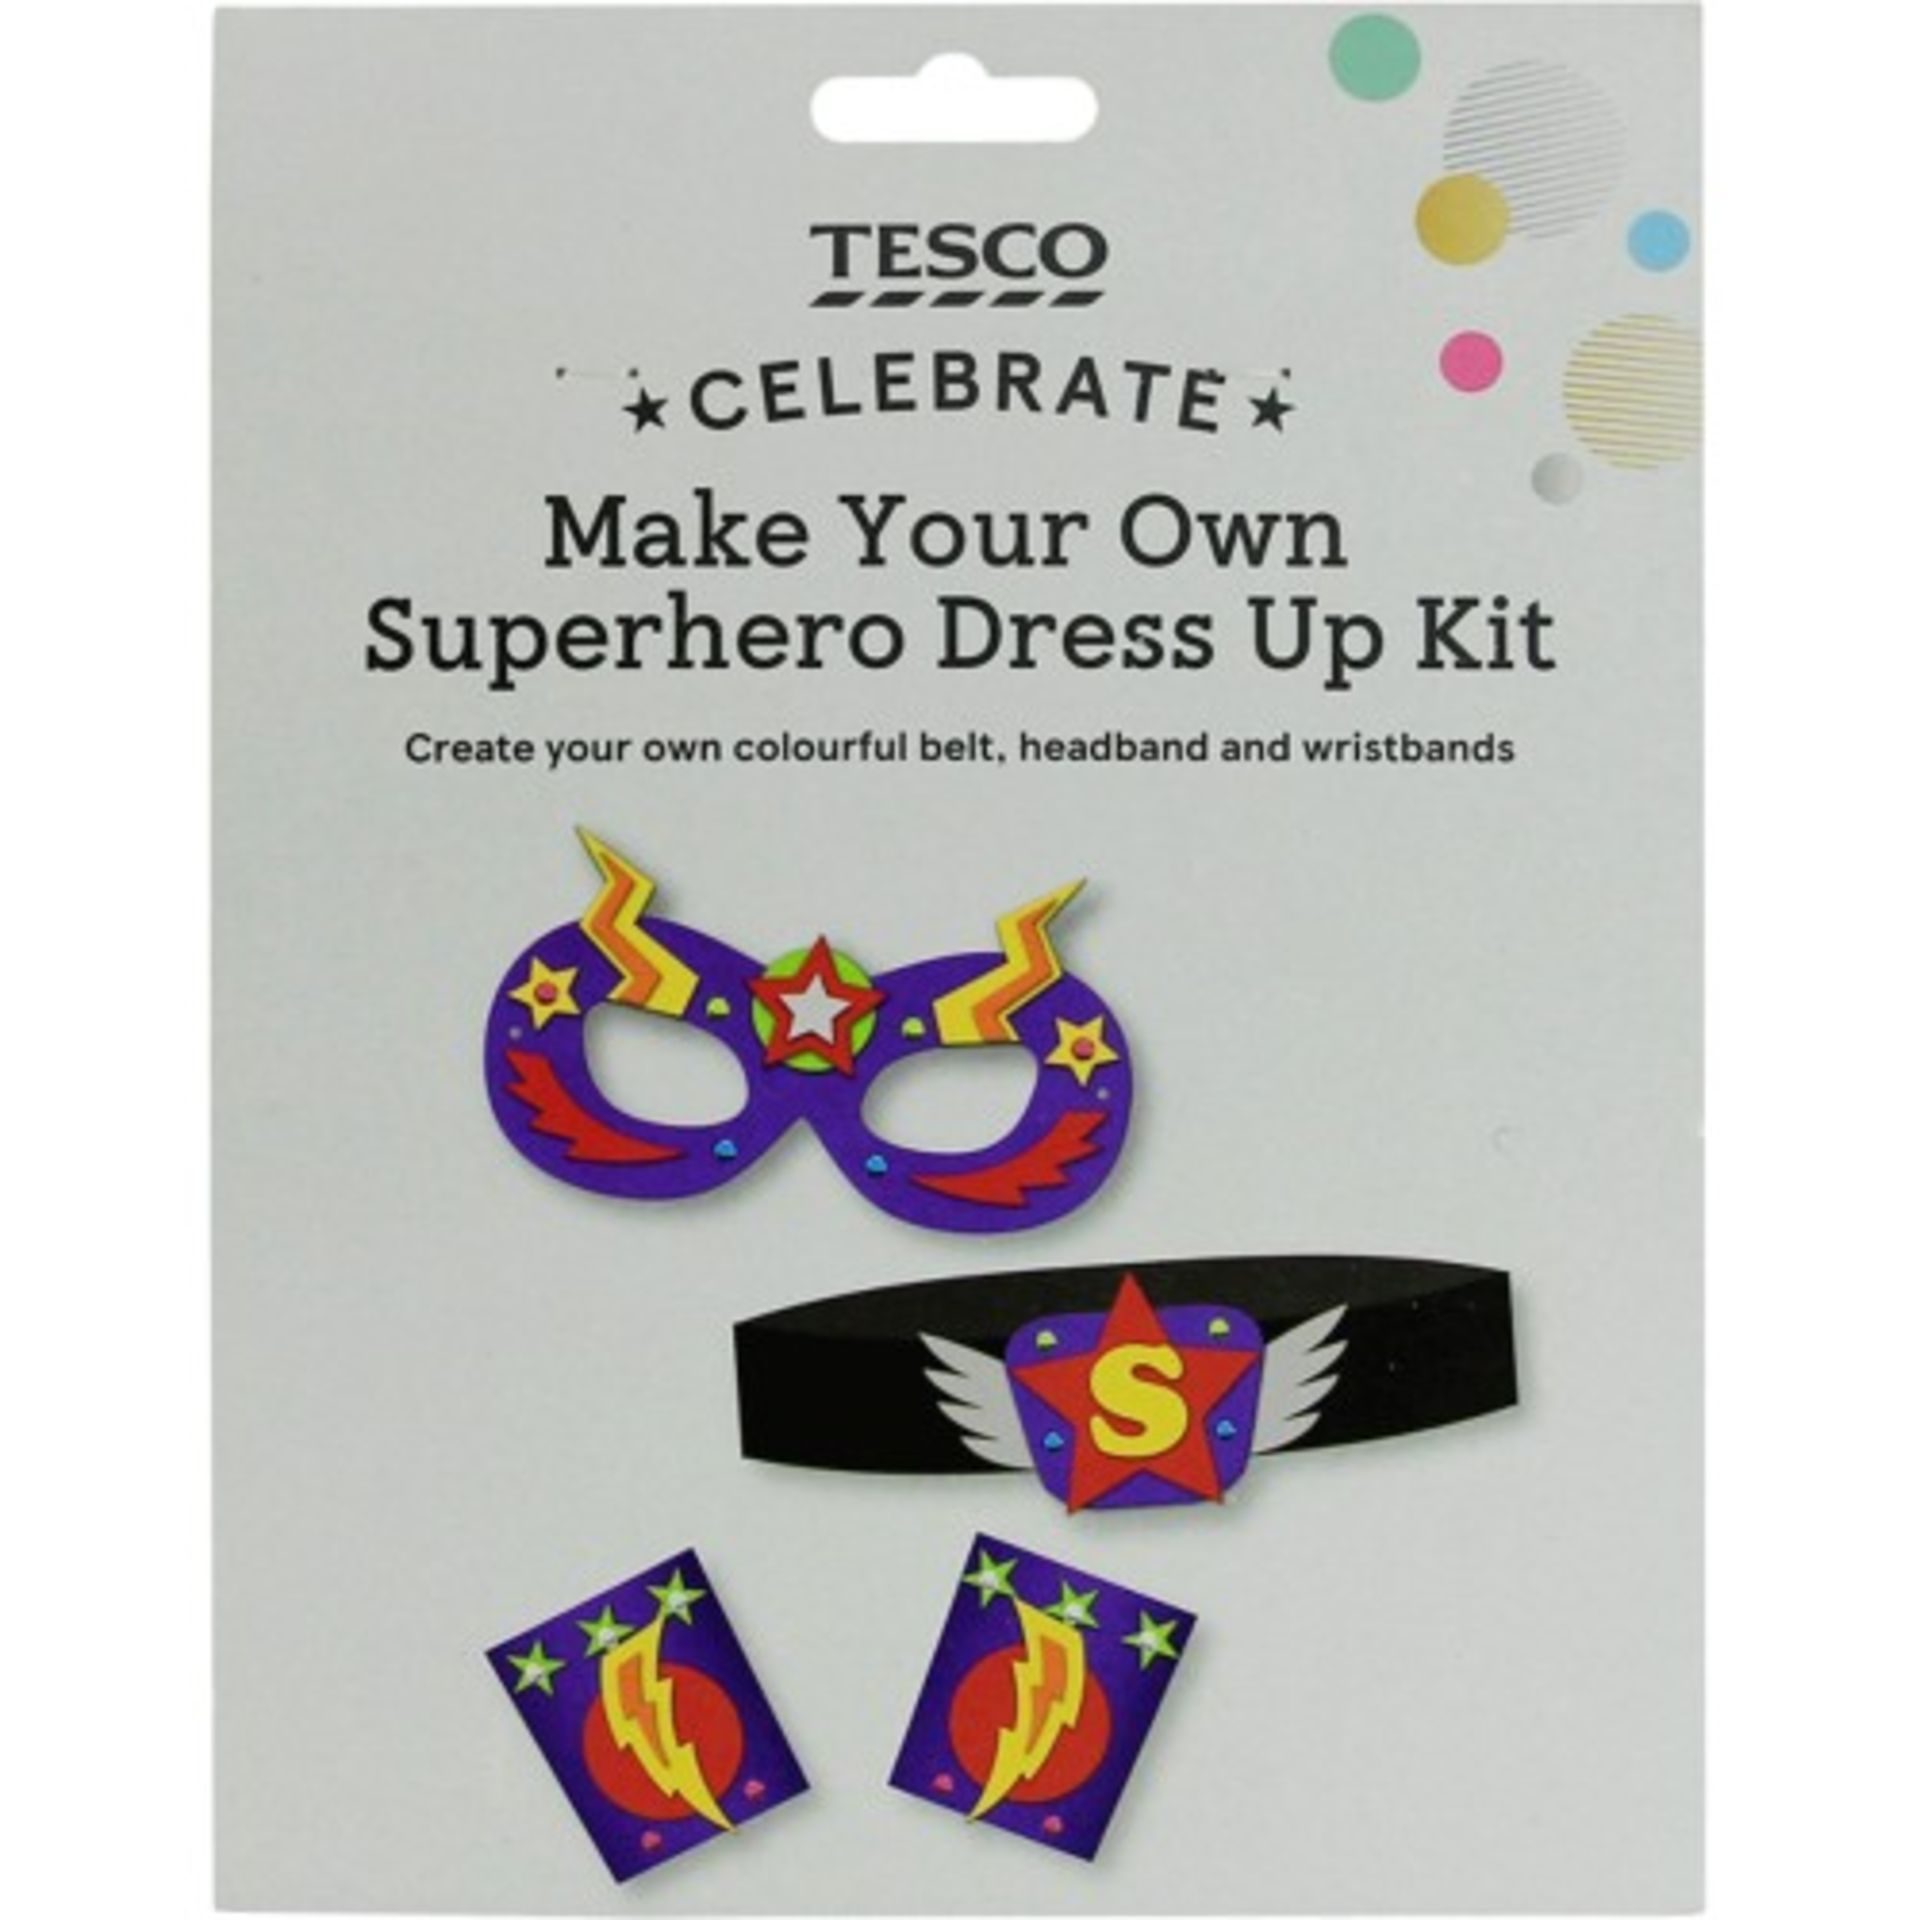 72 X NEW PACKAGED TESCO CELEBRATE MAKE YOUR OWN SUPER HERO DRESS UP KITS. INCLUDES BELT,